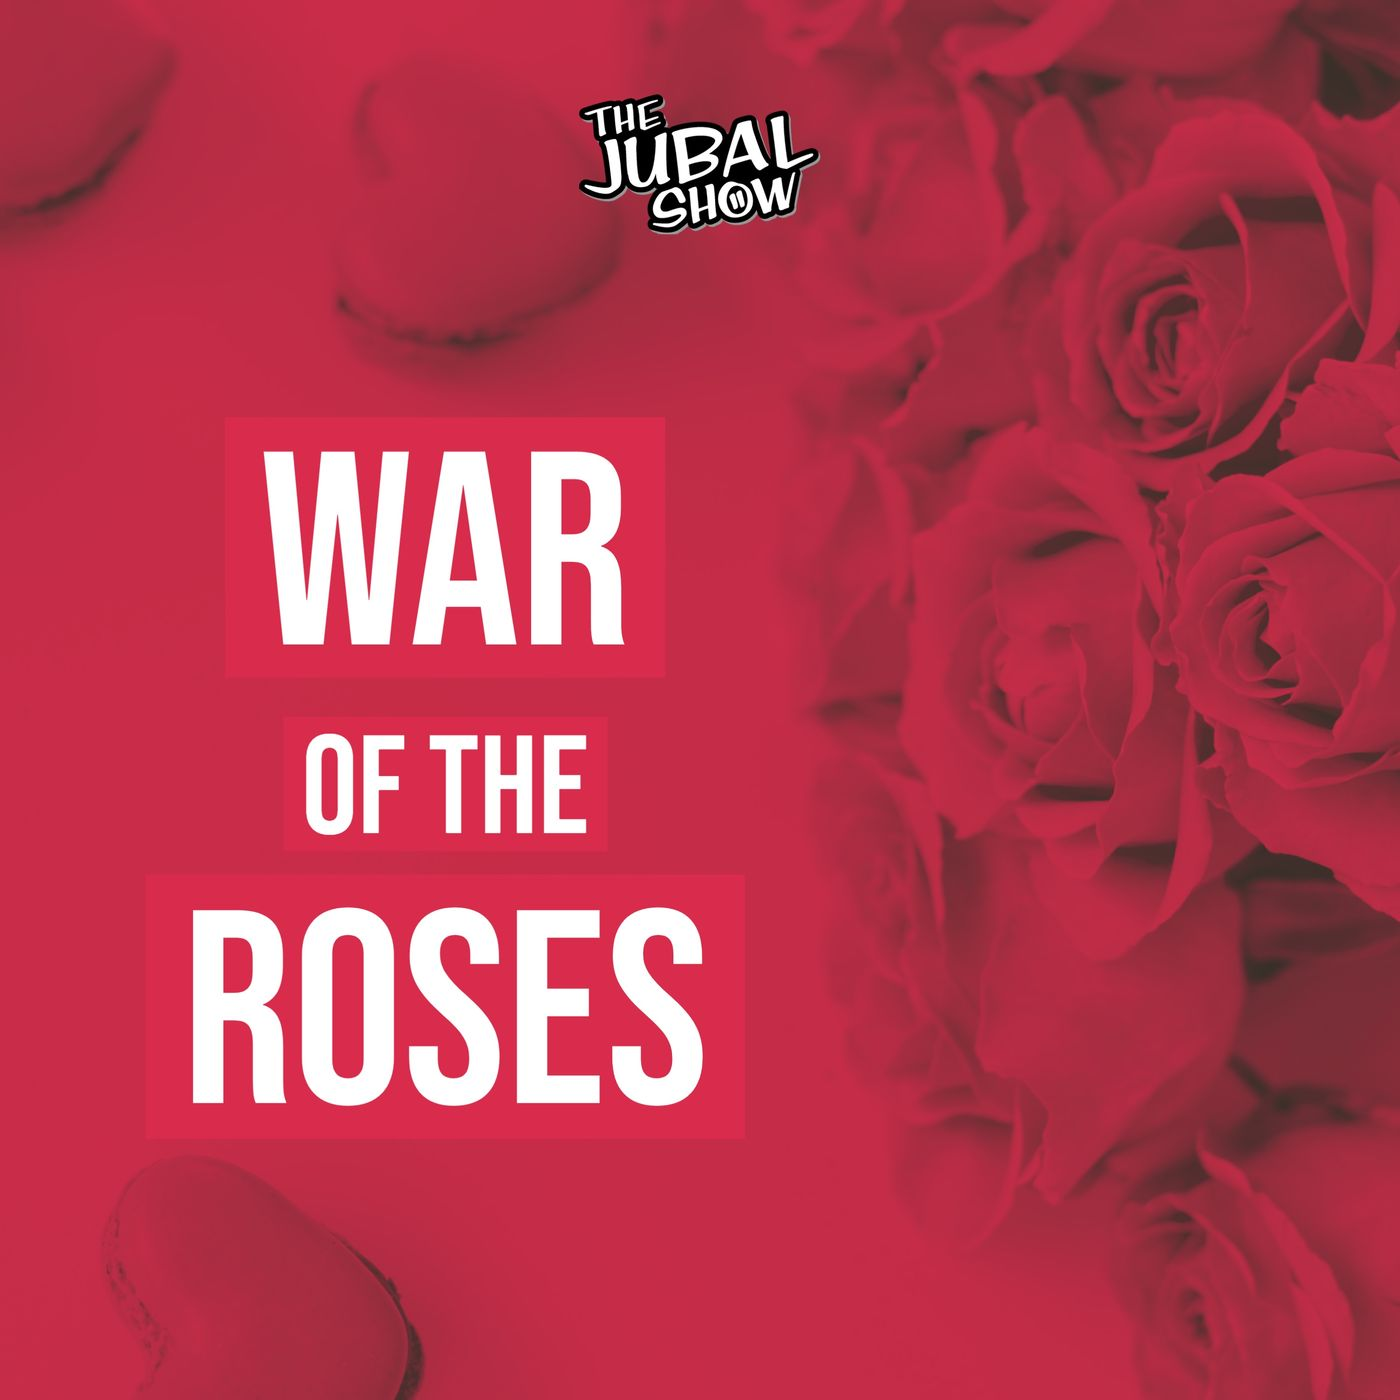 The Jubal Show crushes it in this War of the Roses!